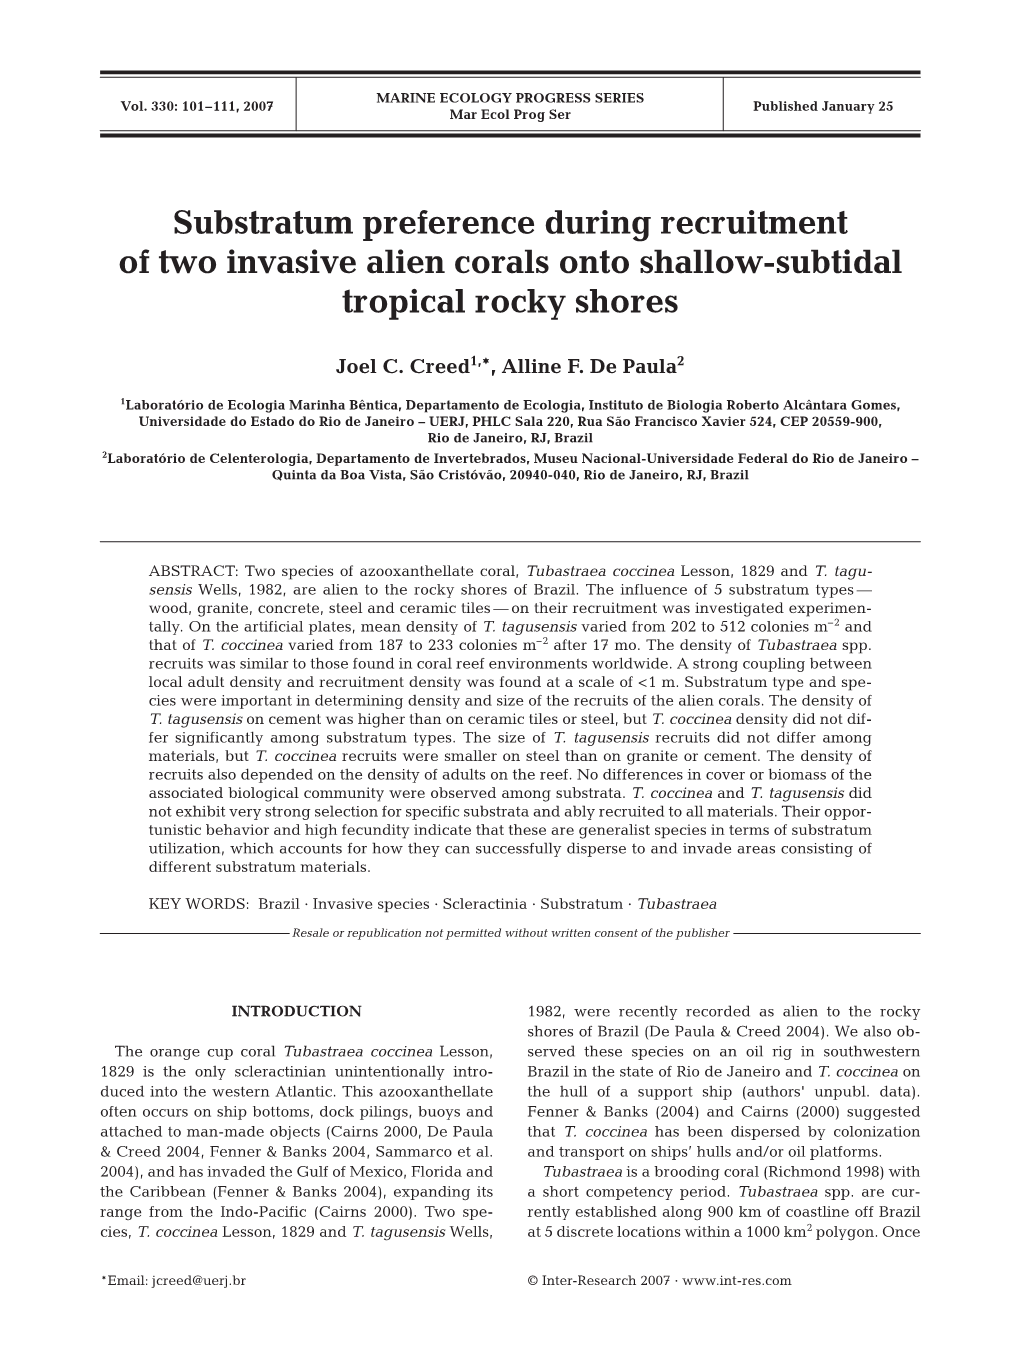 Substratum Preference During Recruitment of Two Invasive Alien Corals Onto Shallow-Subtidal Tropical Rocky Shores